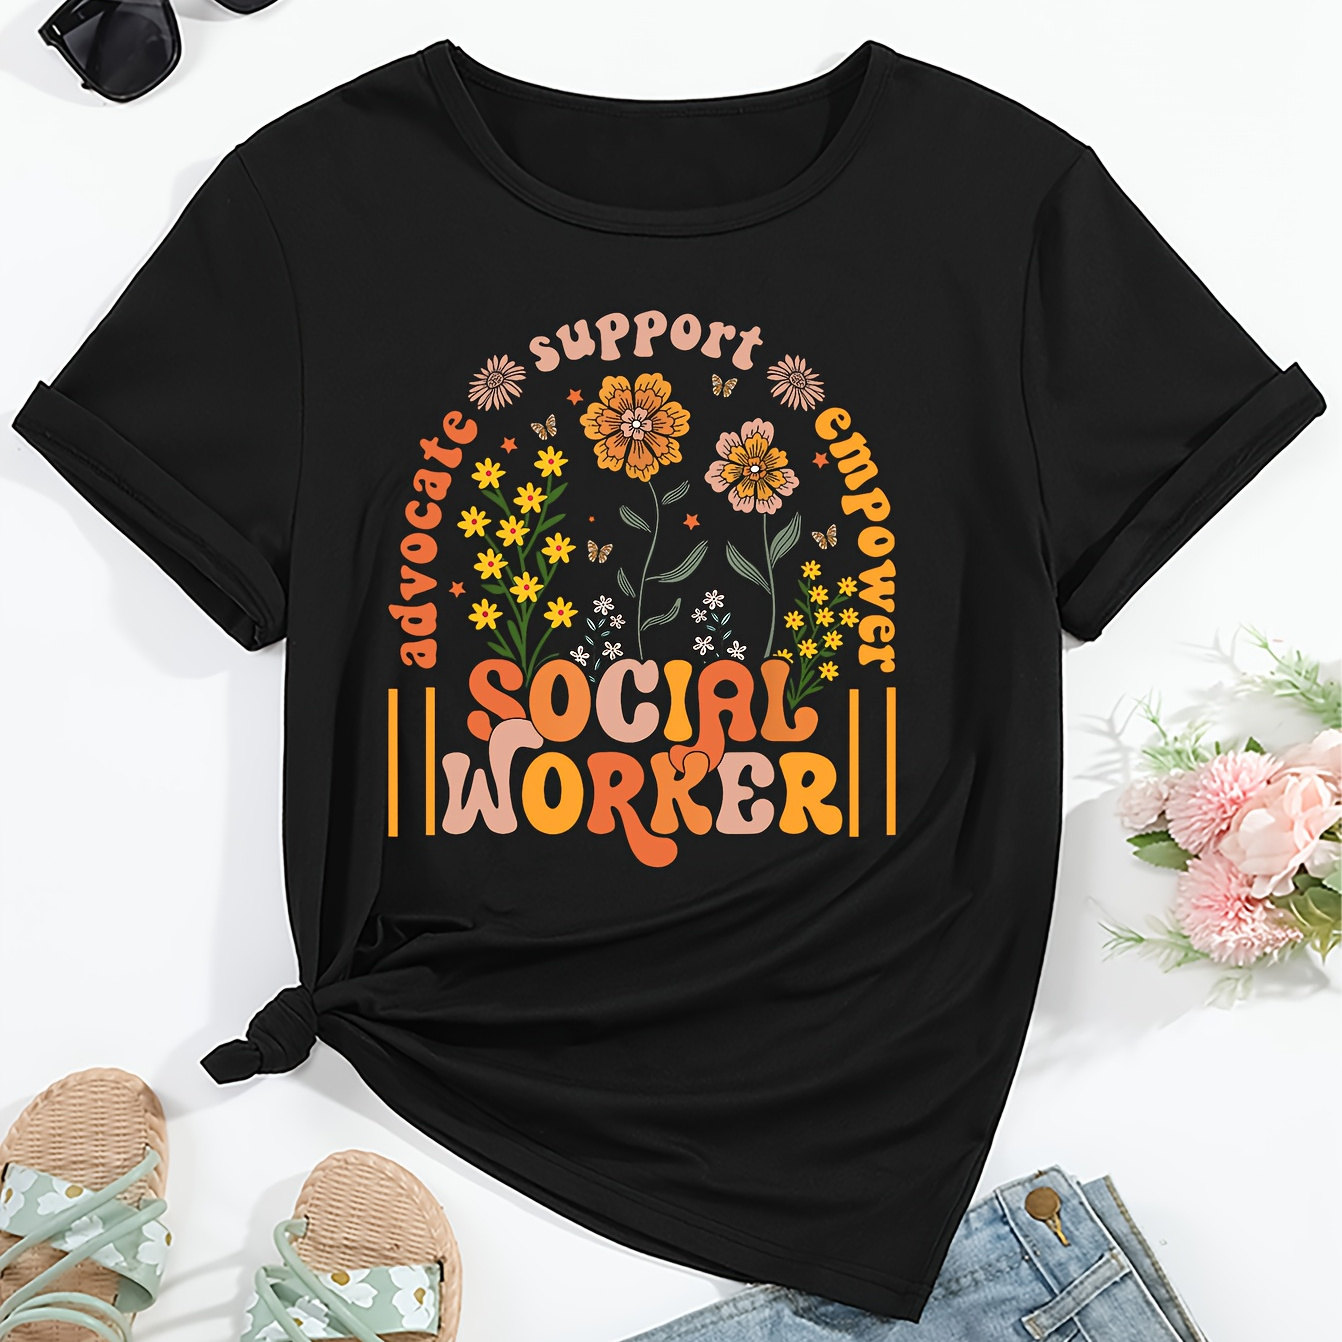 

Women's Short Sleeve T-shirt With Social Worker Print, Comfortable Casual Round Neck Tee For Ladies, Fashionable Summer Top